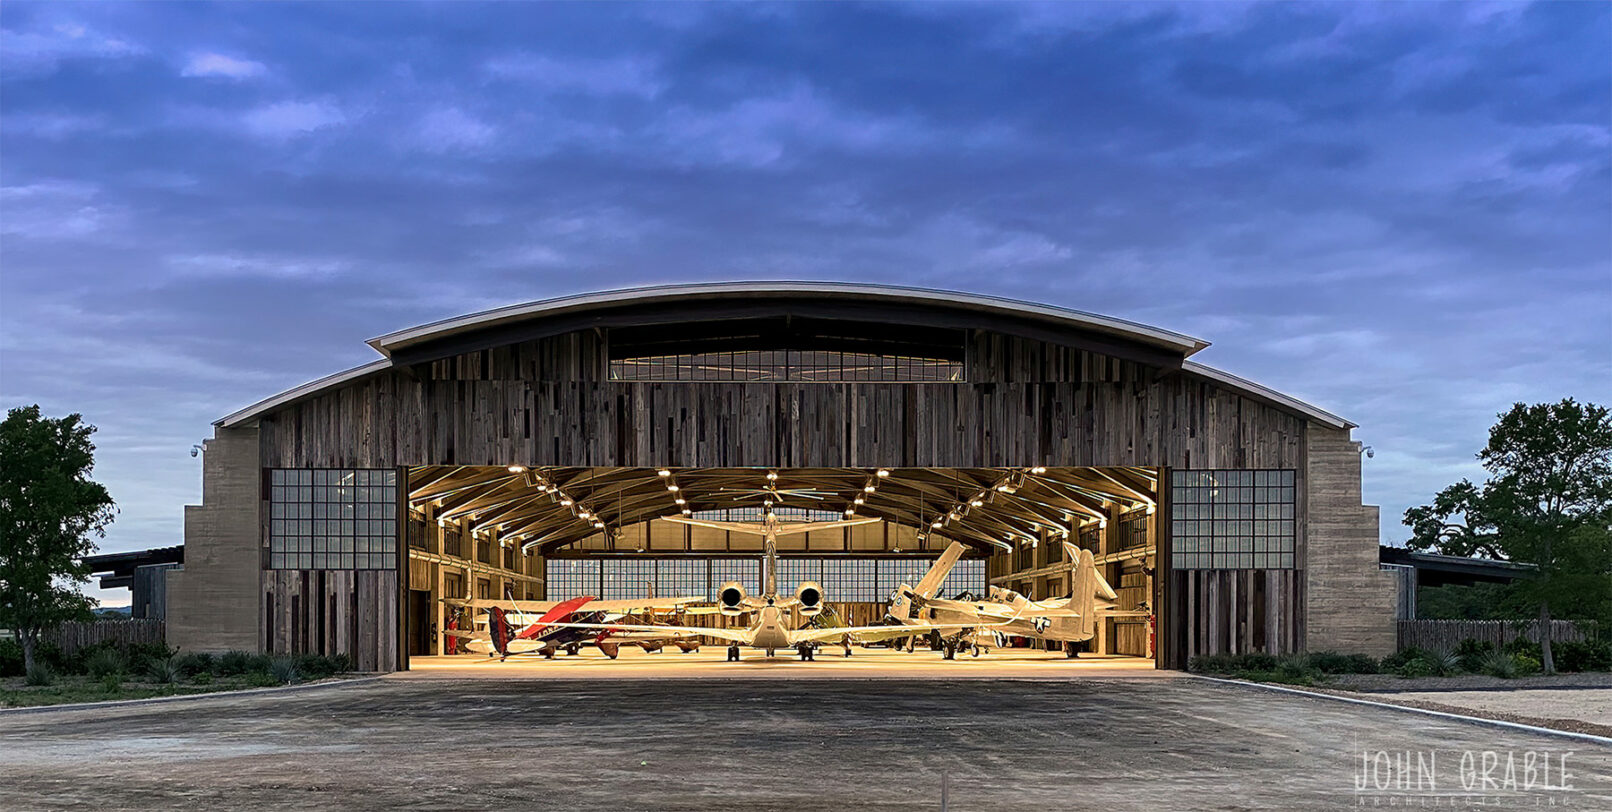 Ghost Hanger project exterior shot at night with airplanes parked inside